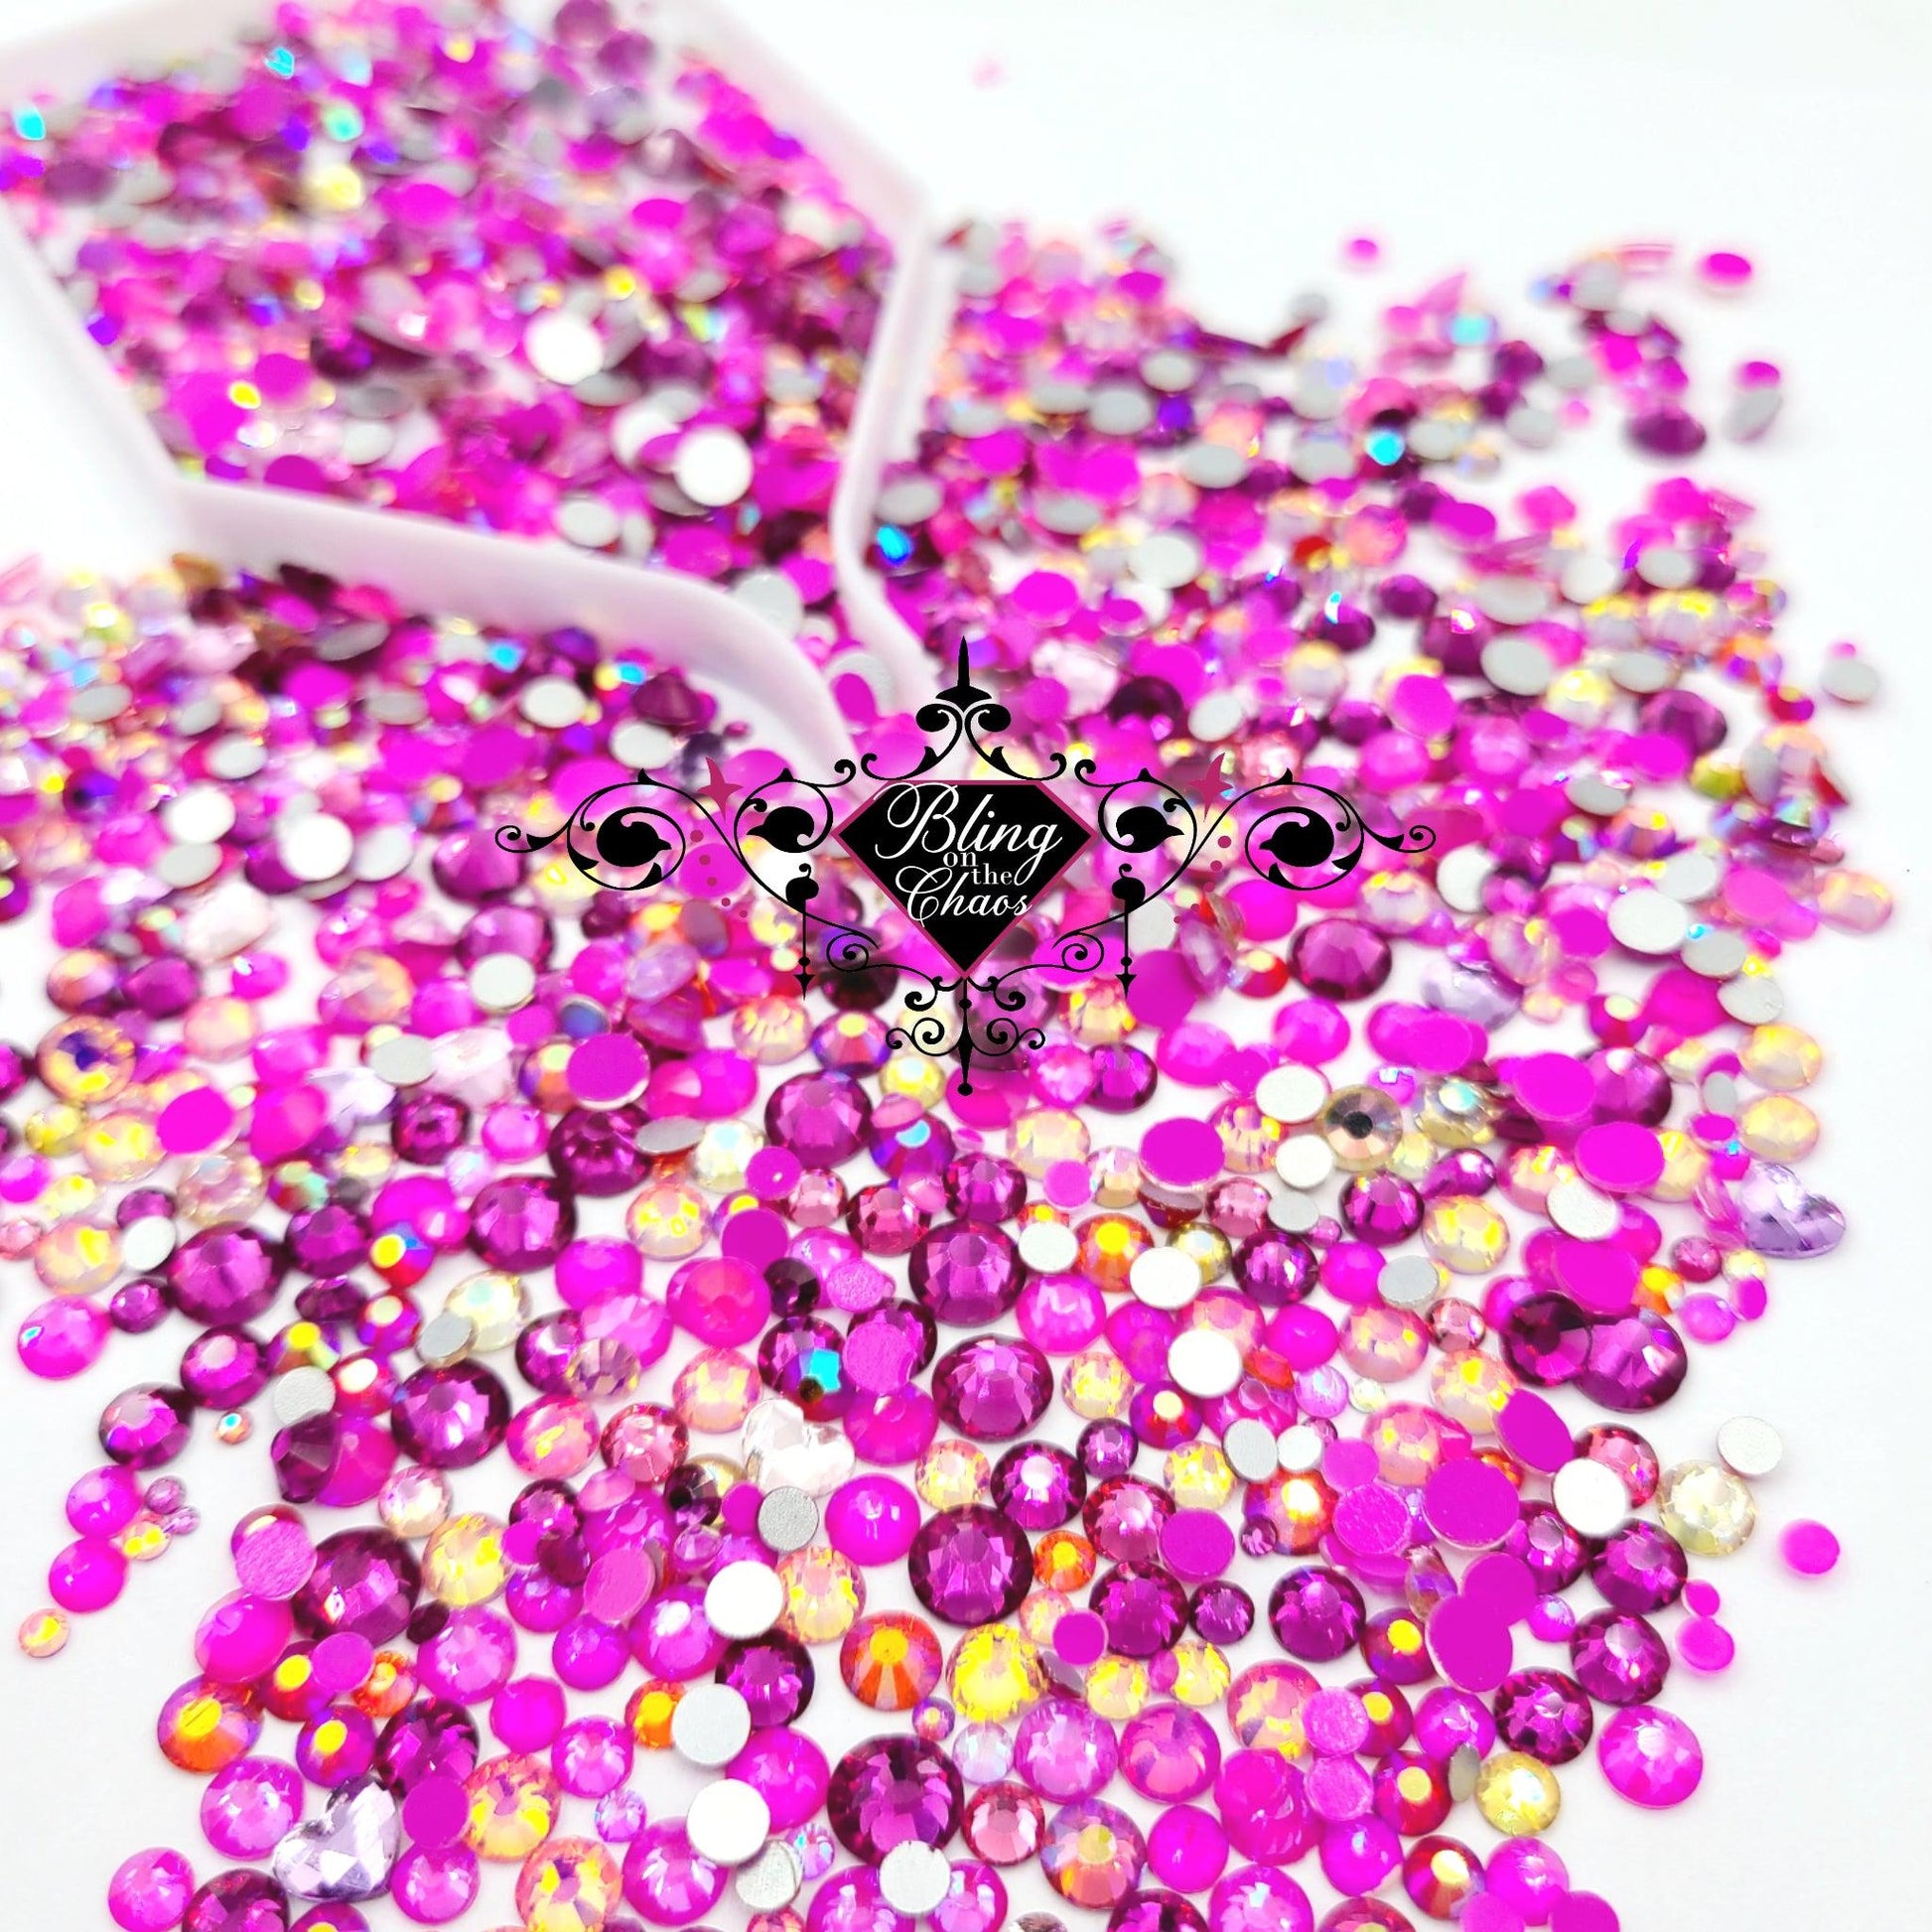 Hugs & Kisses Specialty Mix-Glass Rhinestones-Bling on the Chaos